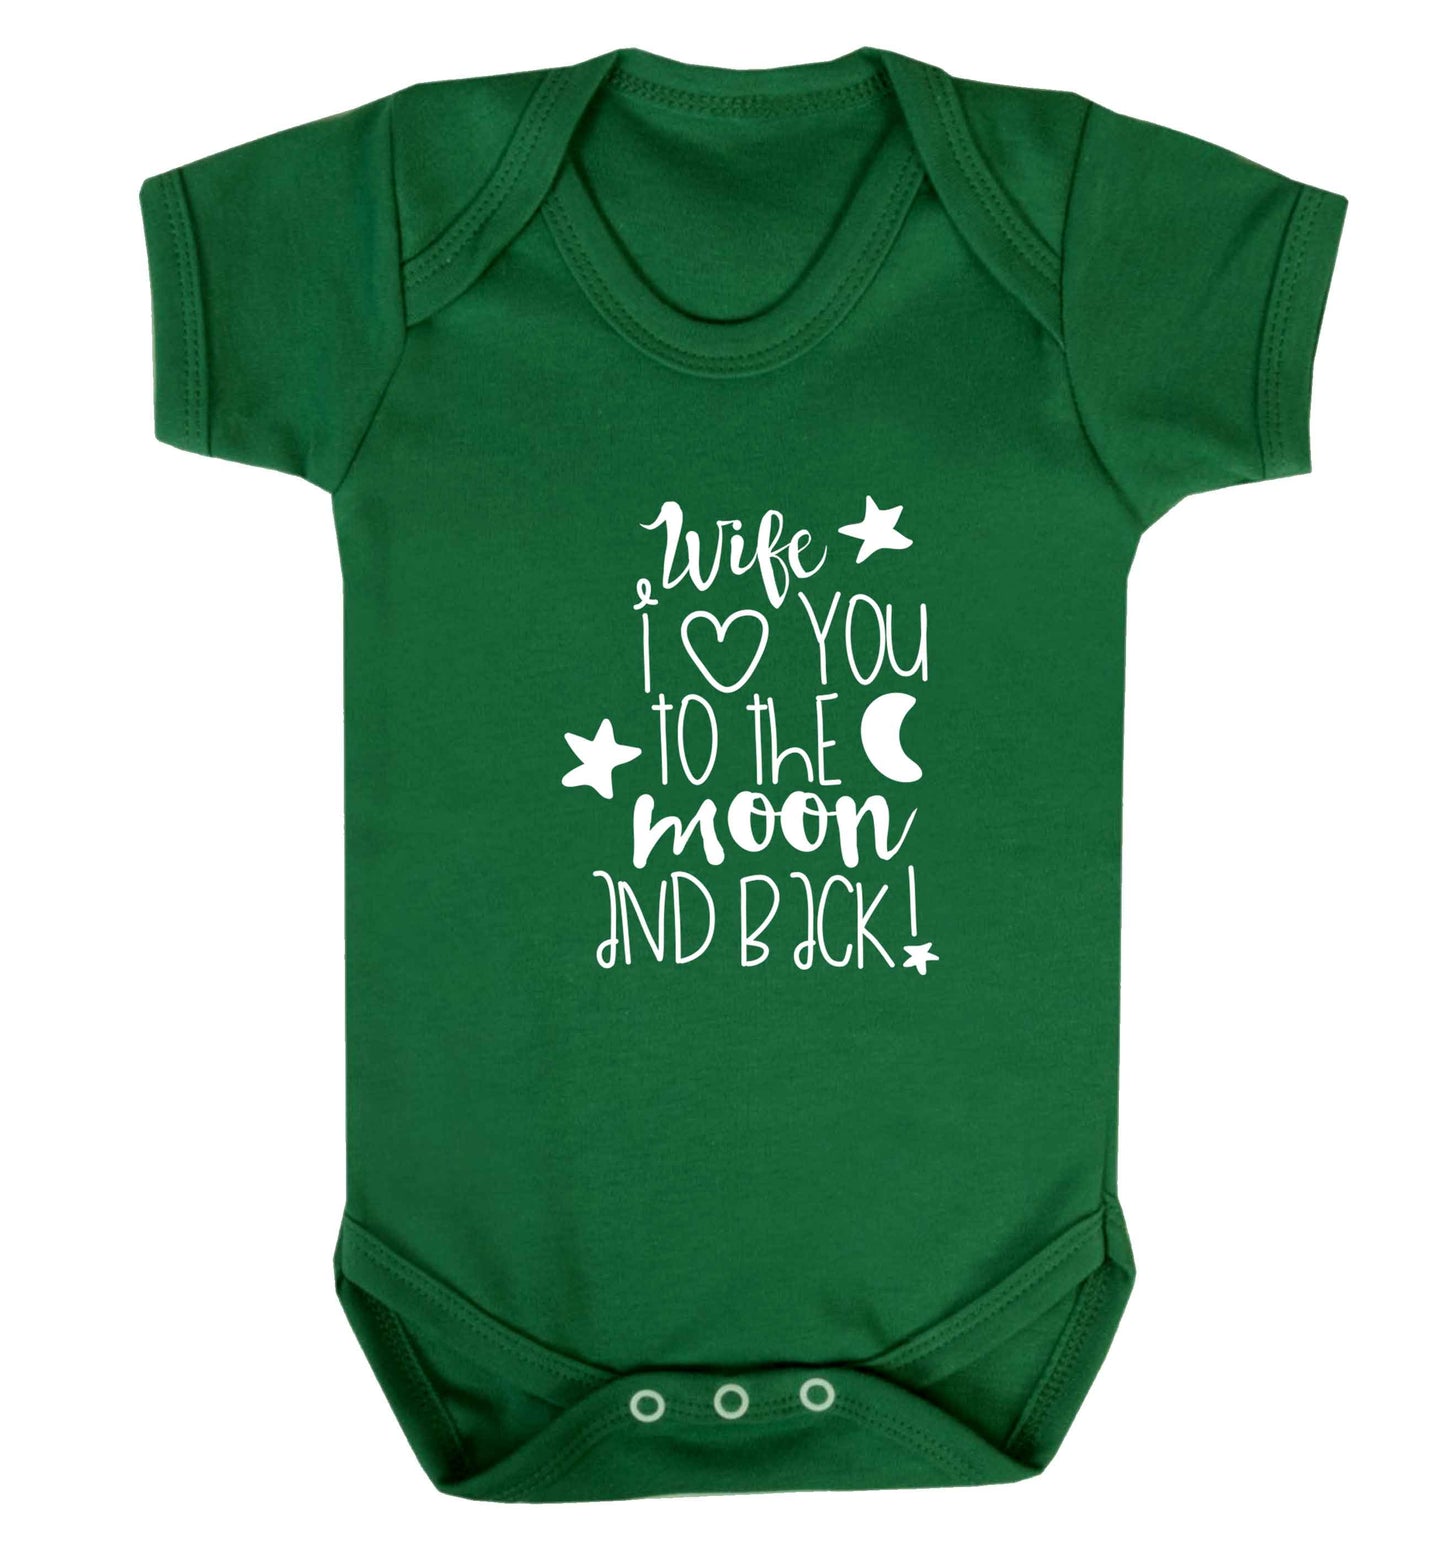 Wife I love you to the moon and back baby vest green 18-24 months